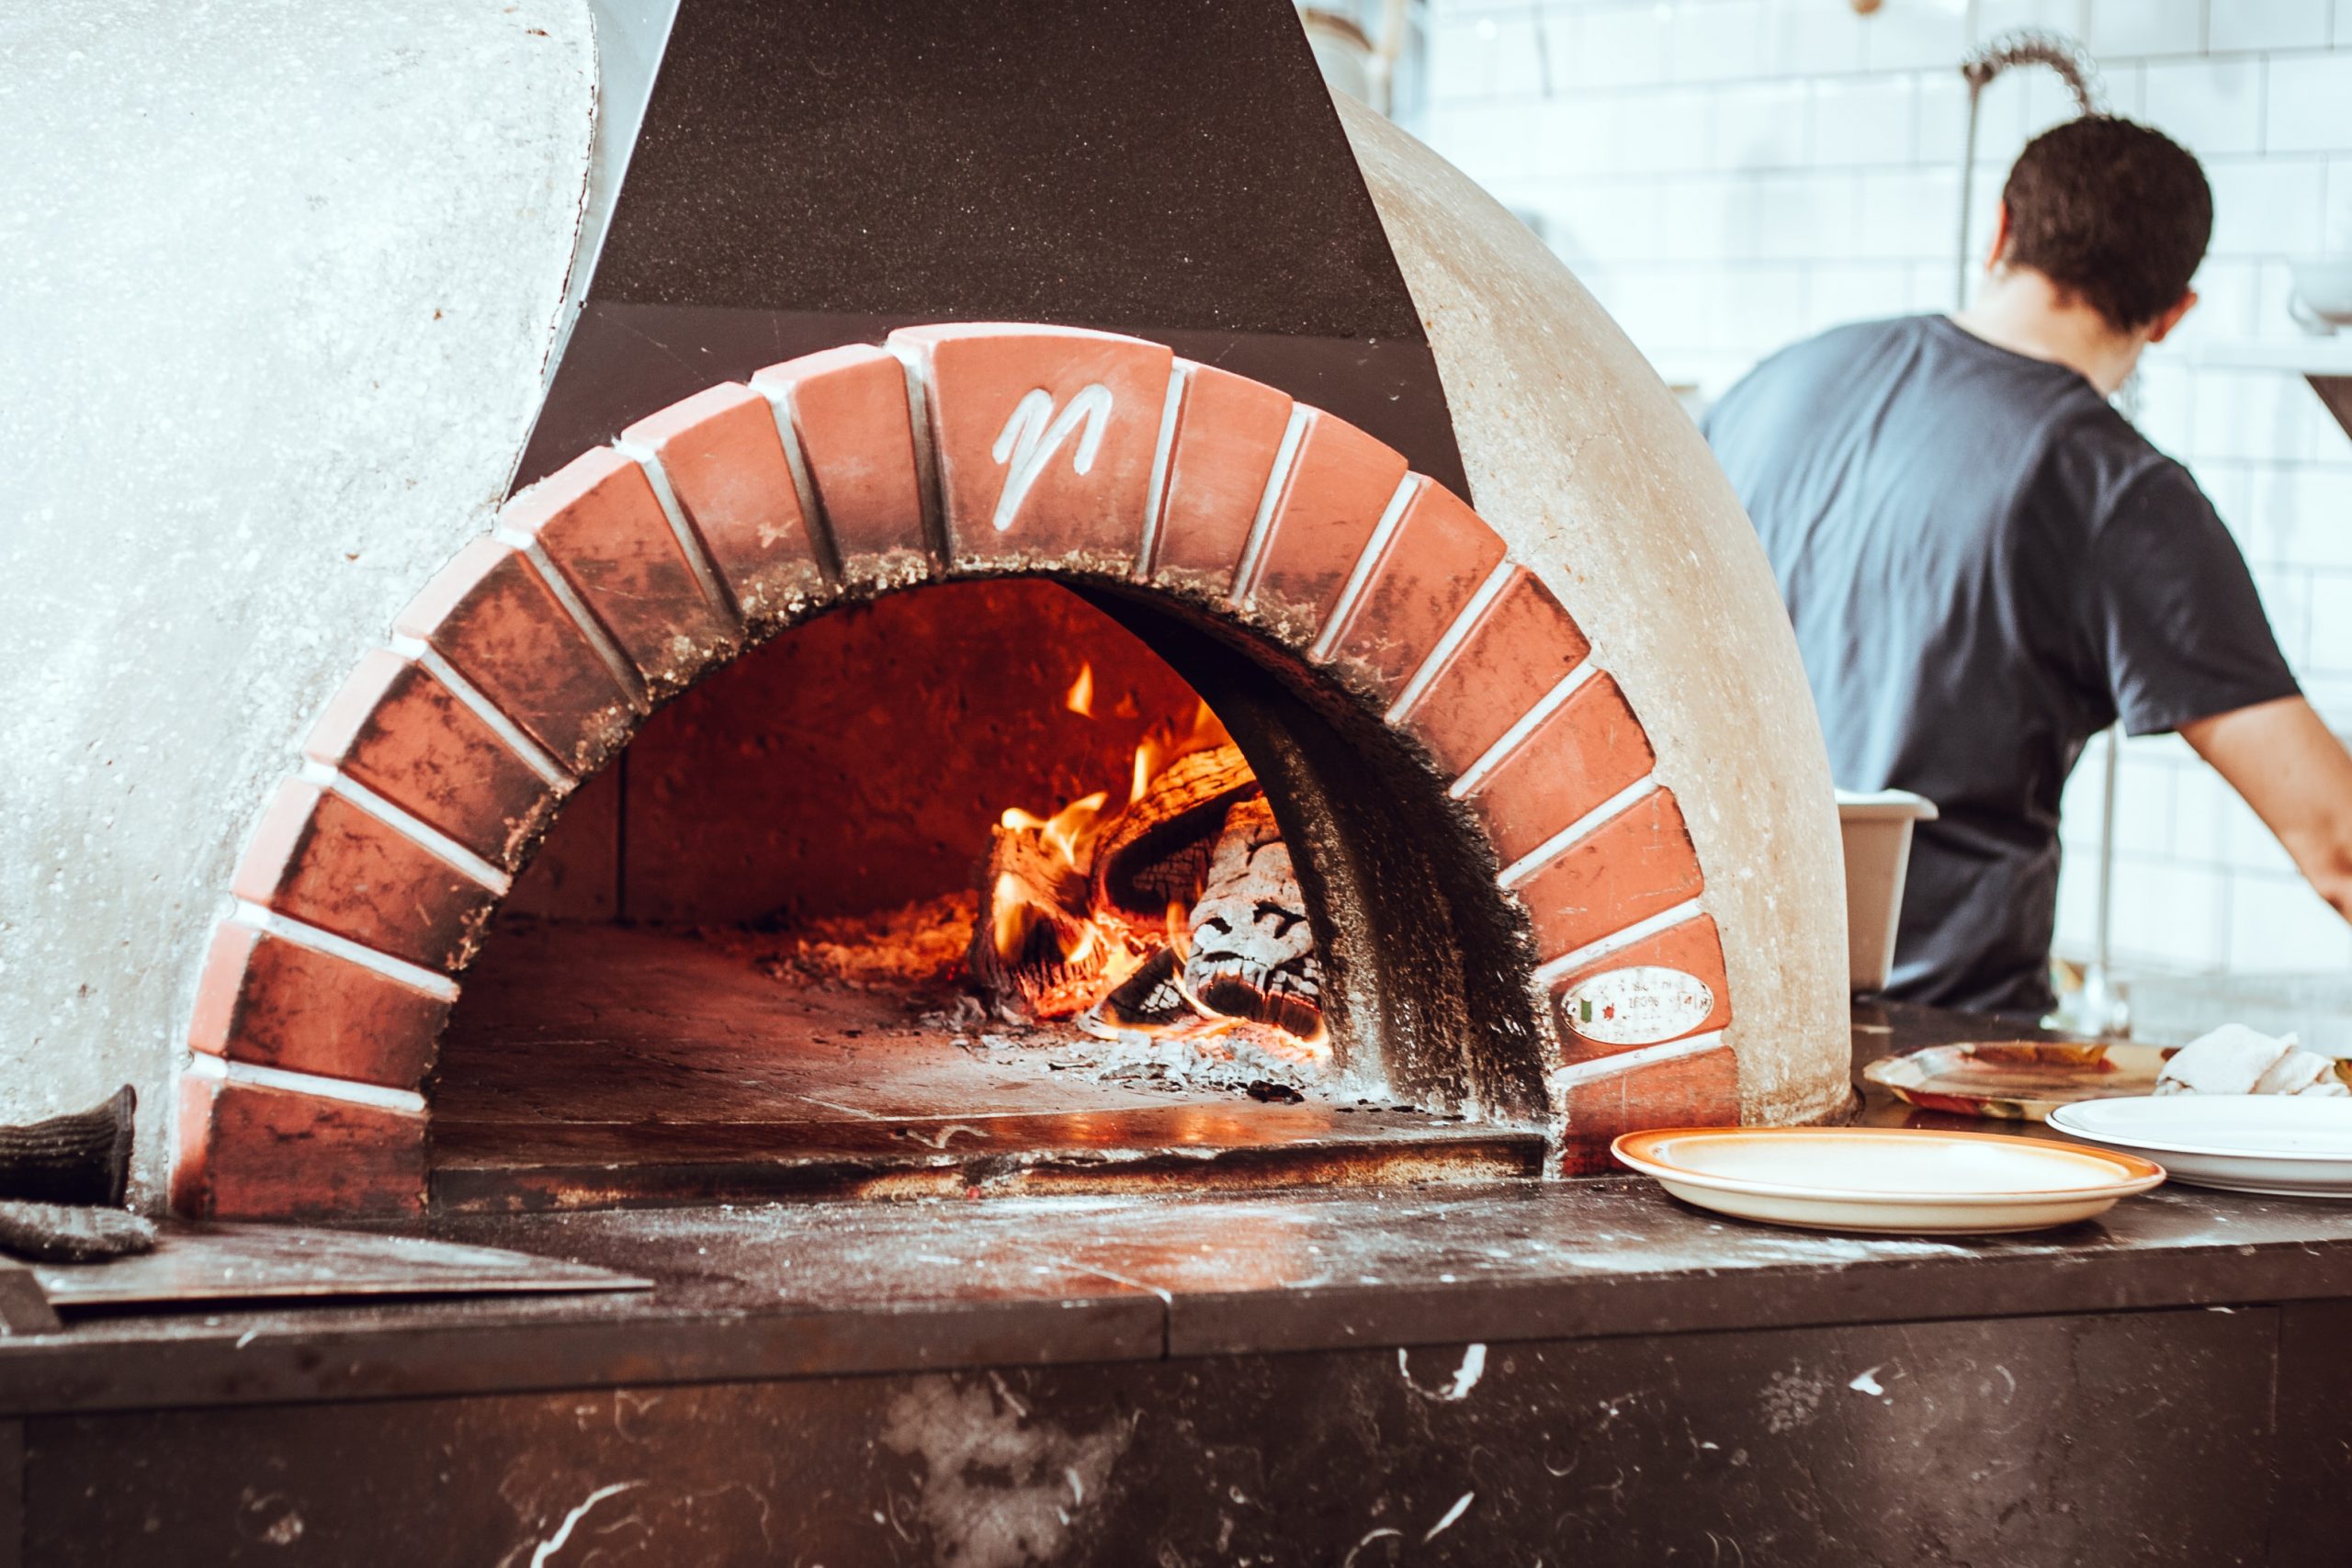 What's the best wood to create flavor in a pizza oven